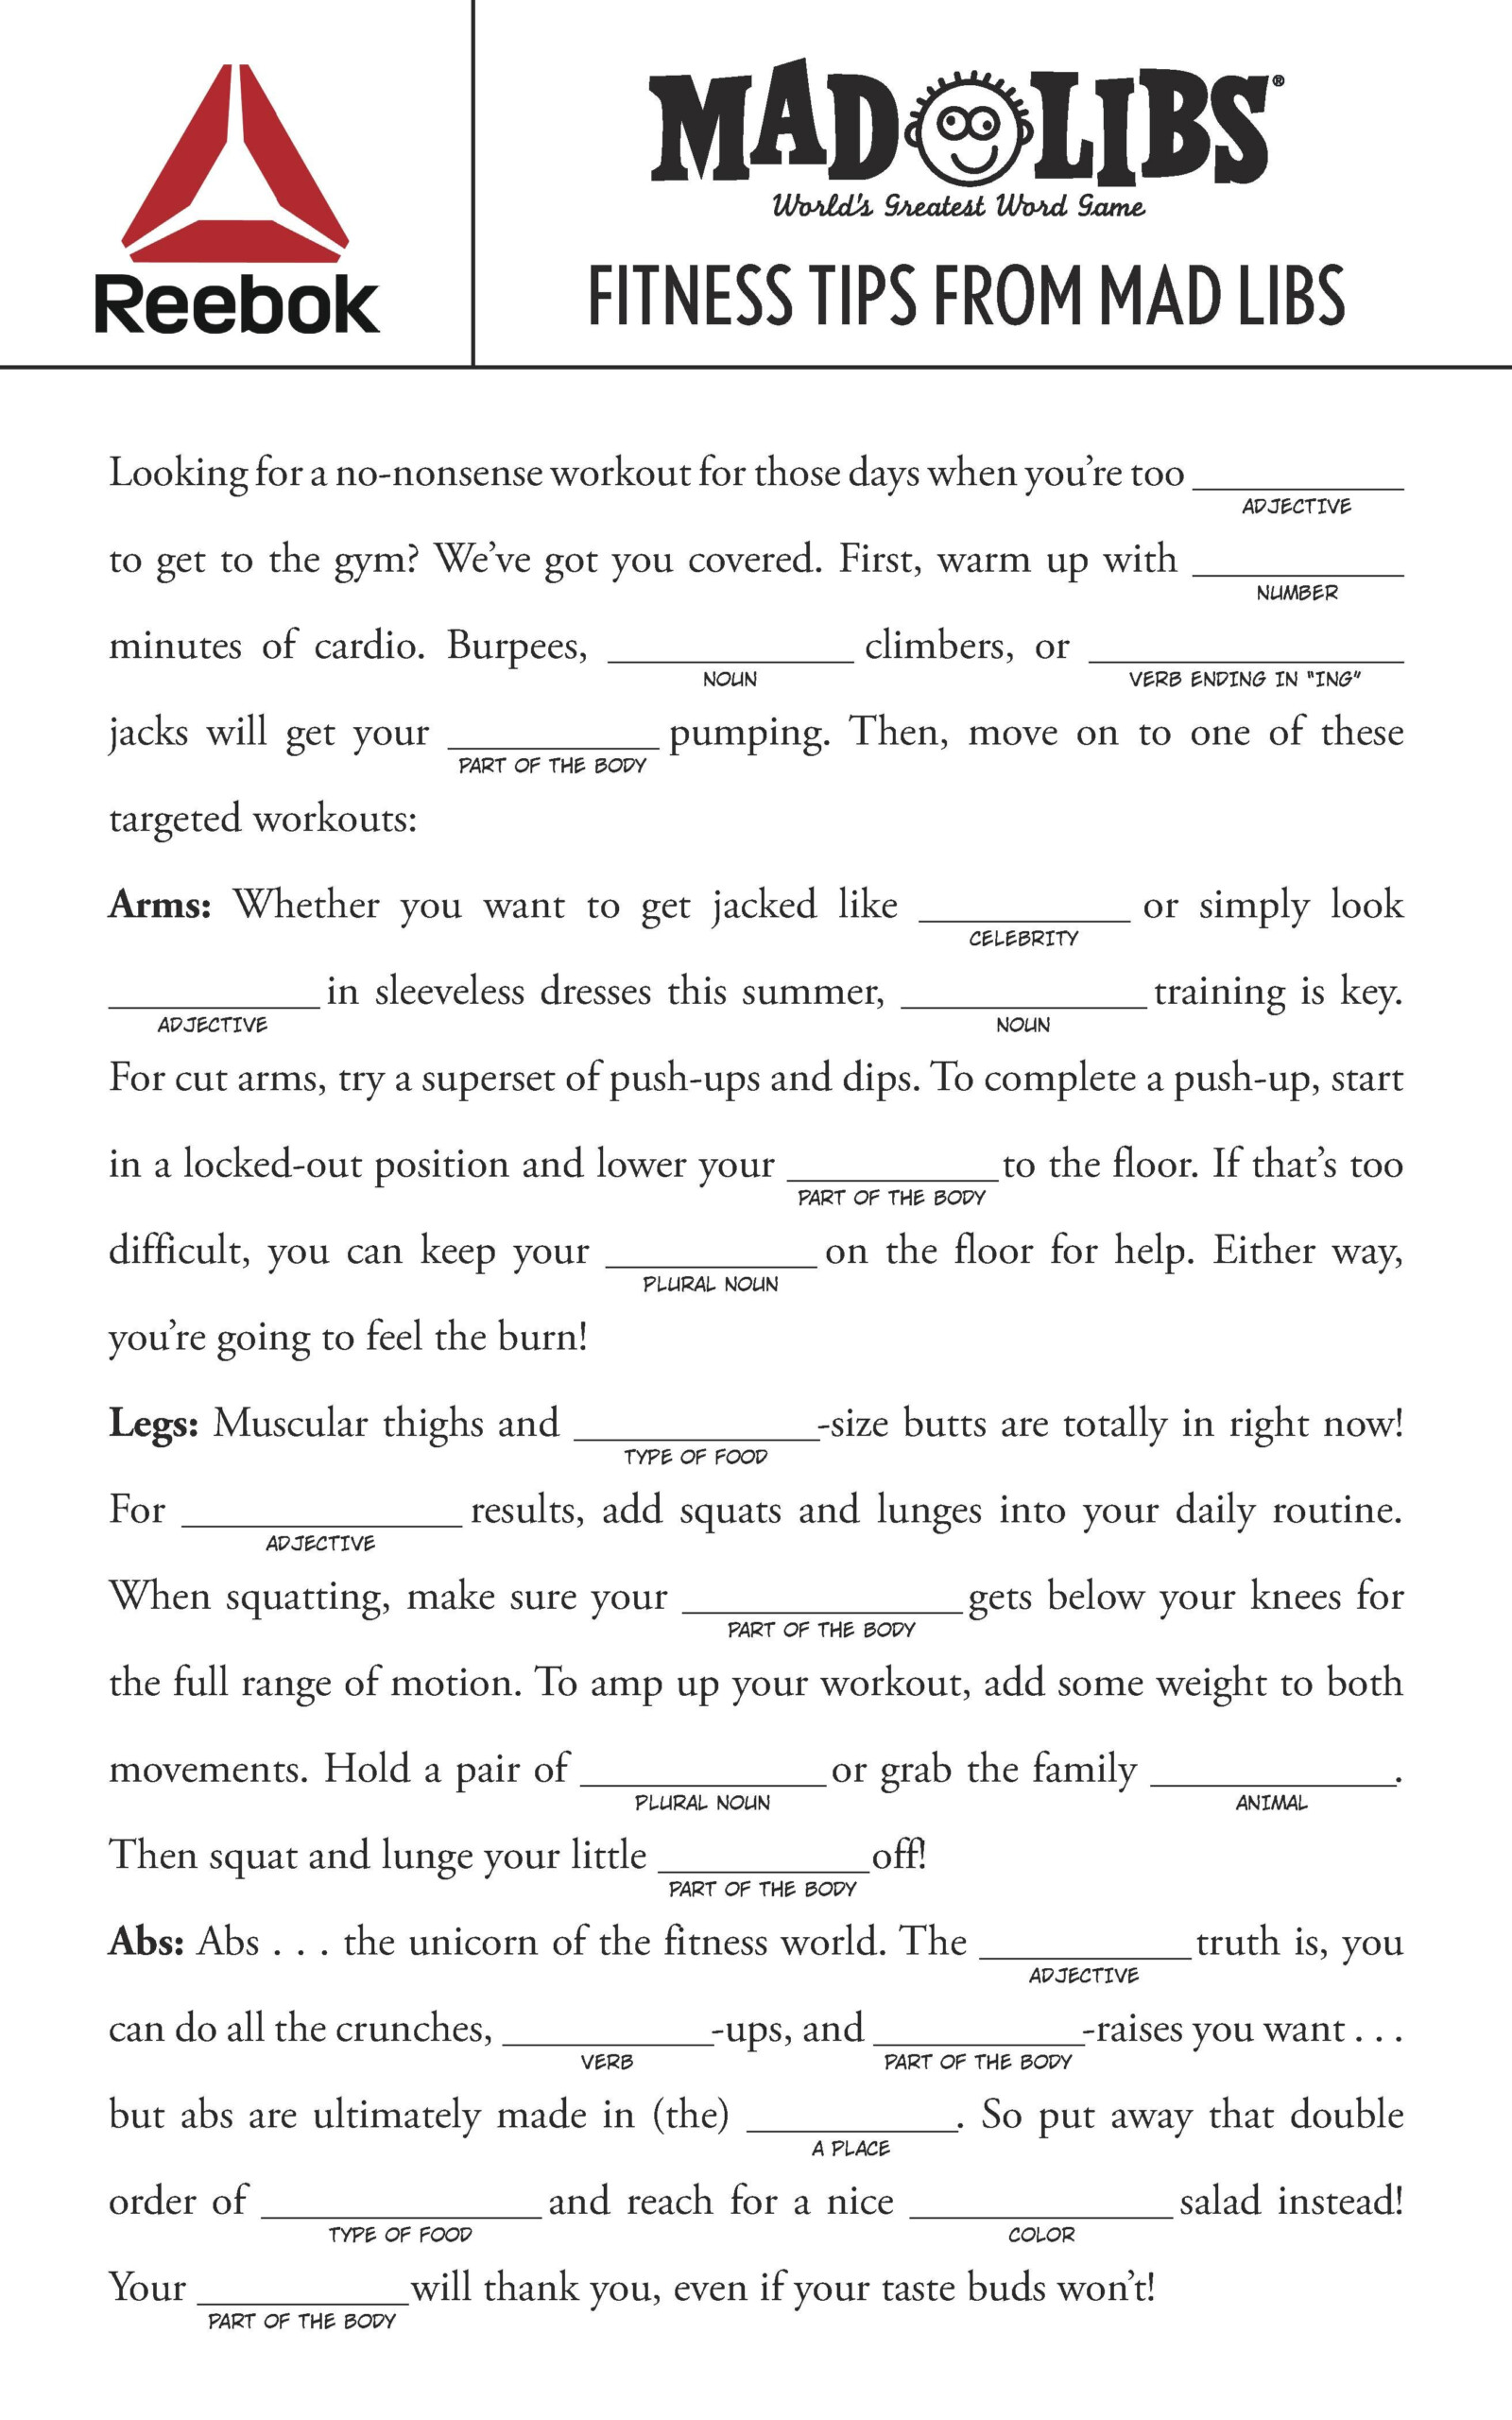 Get Fit With This ADJECTIVE Mad Libs Workout Fitness reebok